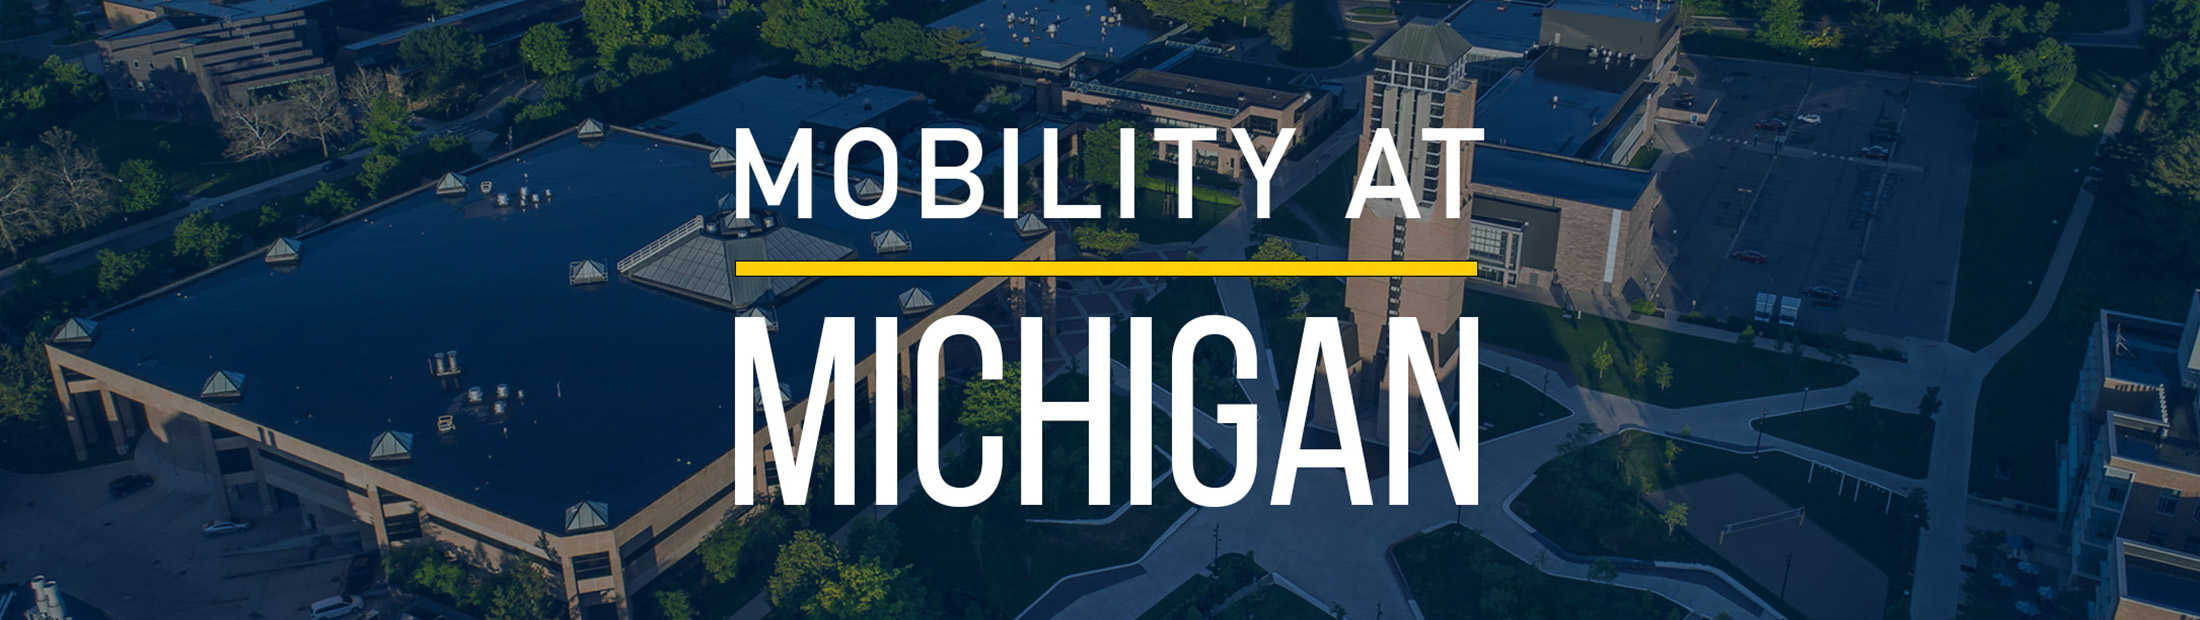 Featured image with Mobility at Michigan text